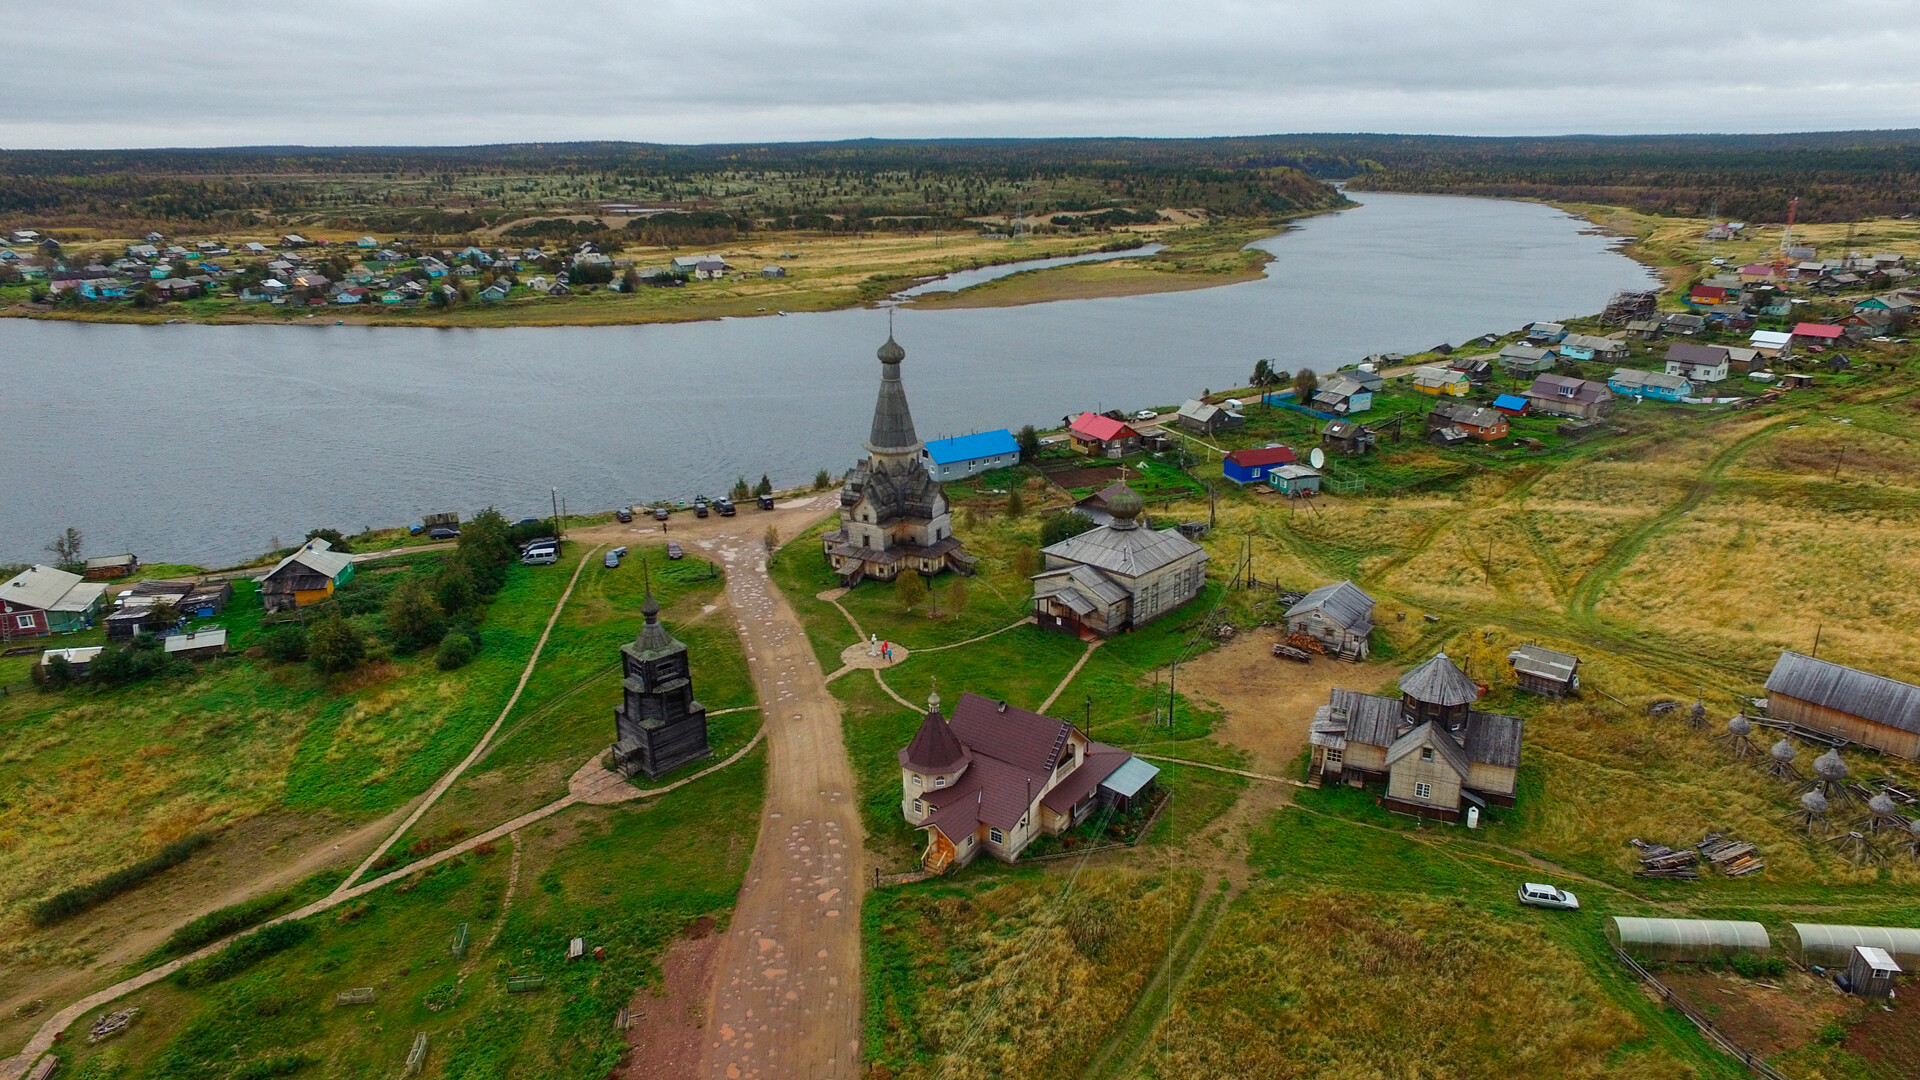 The villiage of Varzuga in Murmansk Region, which belongs to ALL kinds of the North.